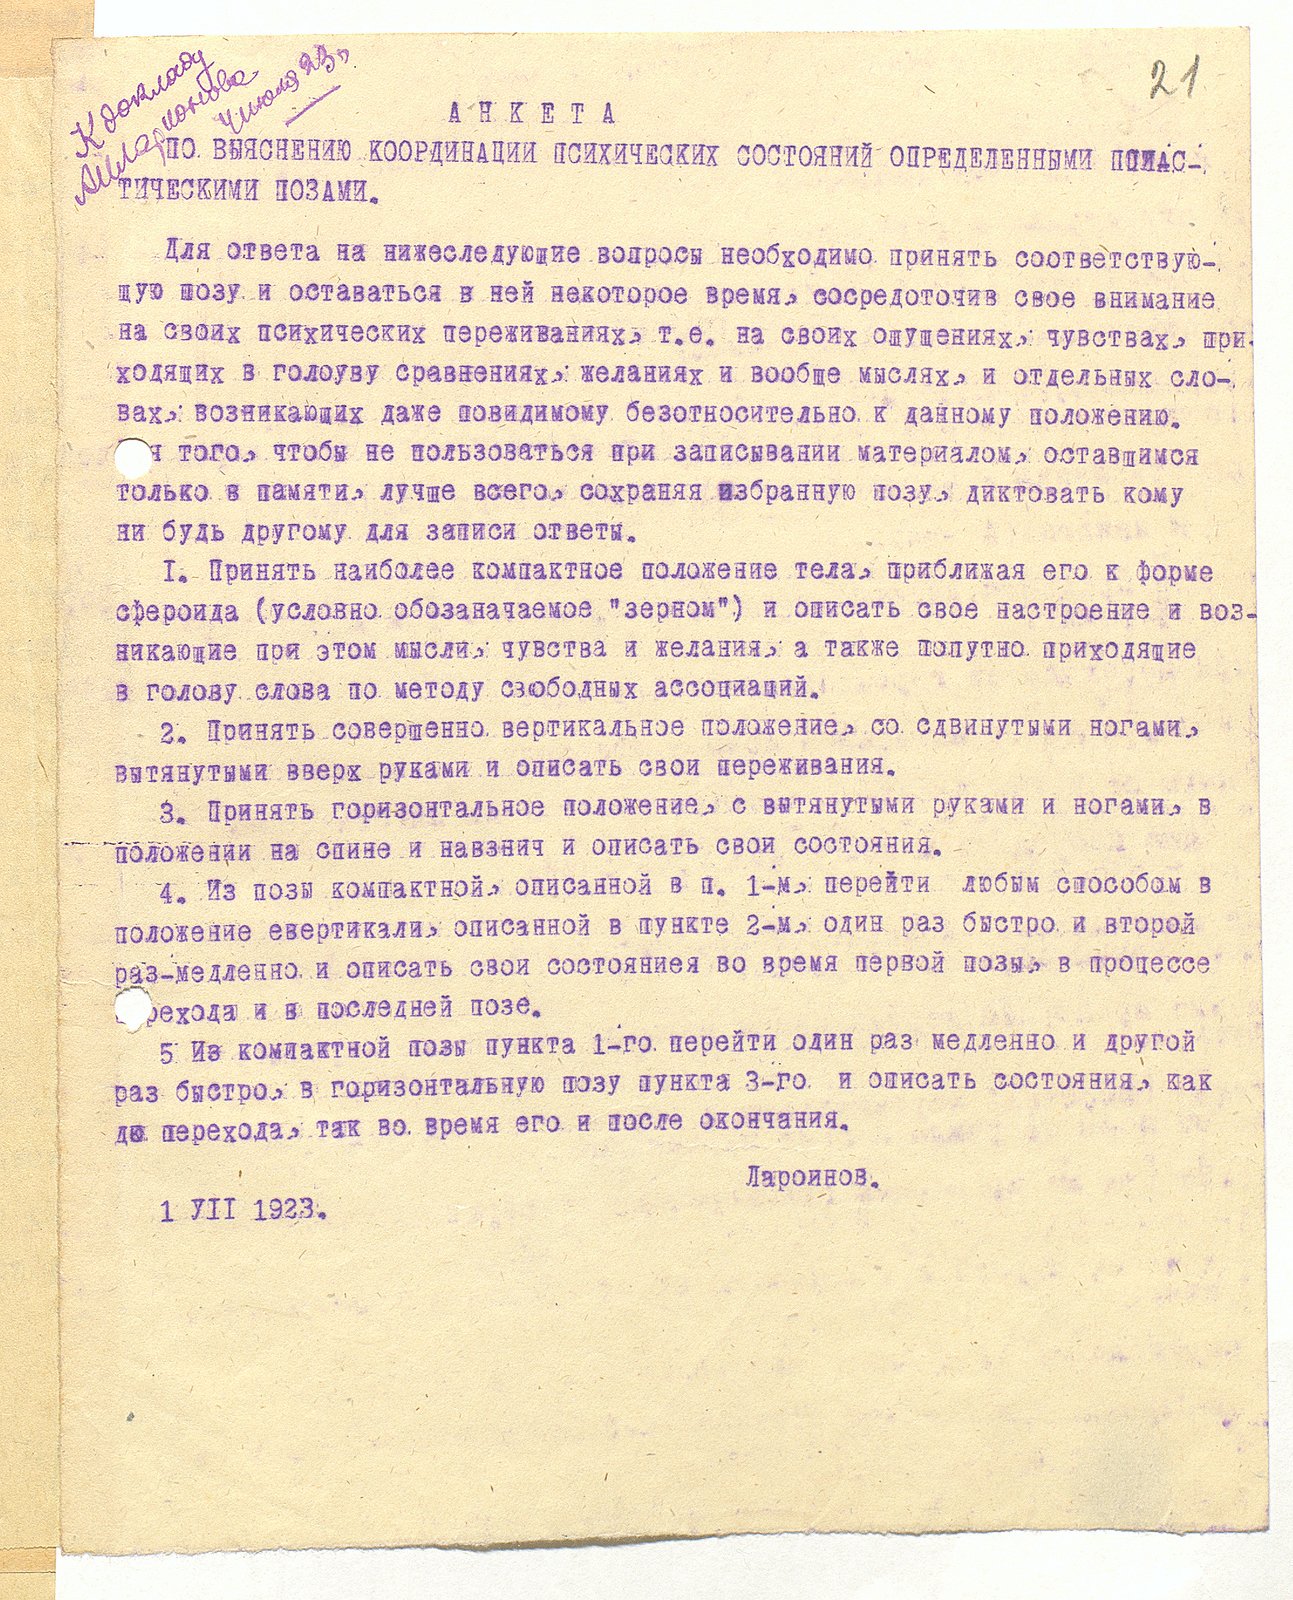 Alexander Larionov&rsquo;s questionnaire for establishing the coordination of mental states with particular plastic poses, July 1, 1923Russian State Archive of Literature and Arts (RGALI)